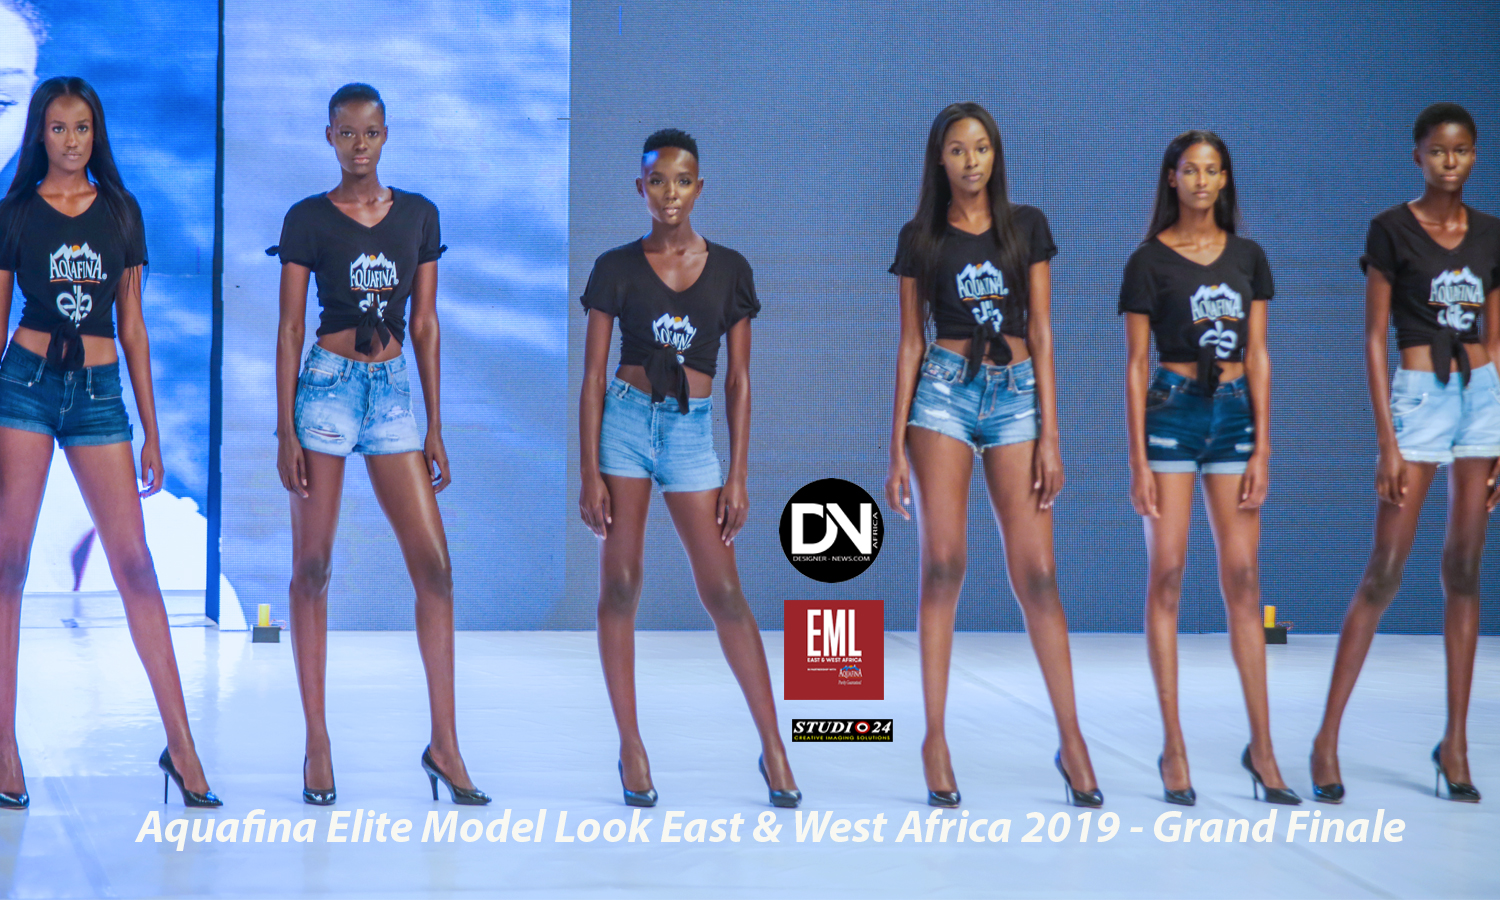 AFRICAN FASHION STYLE MAGAZINE - Aquafina-Elite-Model-Look-East-and West Africa 2019 Location Lagos Nigeria - Eko-Hotel - Beth Model Management - PR Indirâh Events and Communication - Photographer DAN NGU - Official Media Partner DN AFRICA - STUDIO 24 NIGERIA - STUDIO 24 INTERNATIONAL - Ifeanyi Christopher Oputa MD AND CEO OF COLVI LIMITED AND STUDIO 24 - CHEVEUX CHERIE and CHEVEUX CHERIE STUDIO BY MARIEME DUBOZ- Fashion Editor Nahomie NOOR COULIBALY